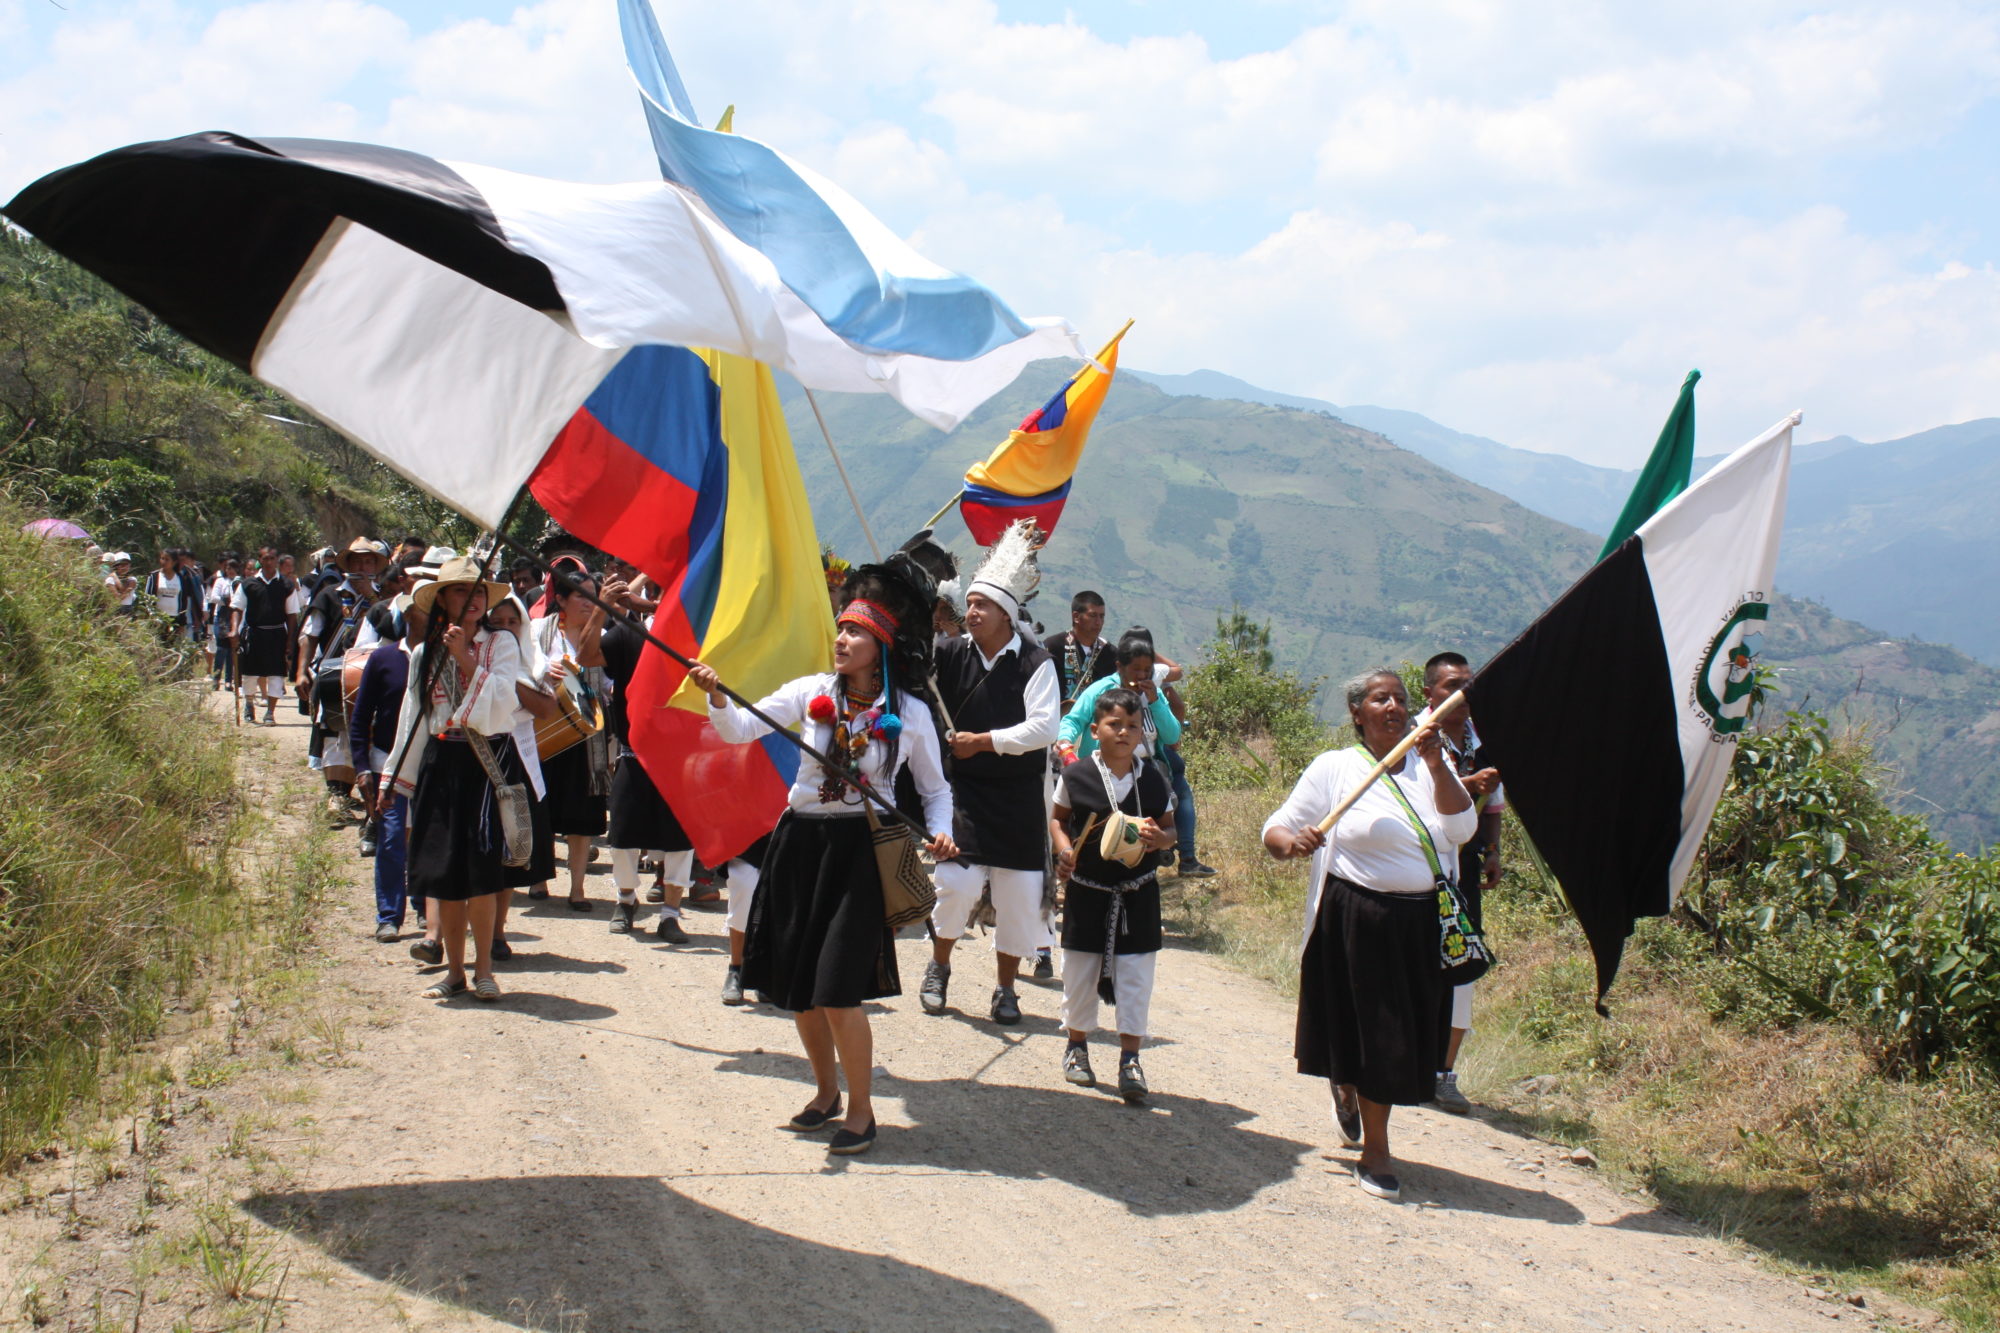 Inga community of southern Colombia in a parade